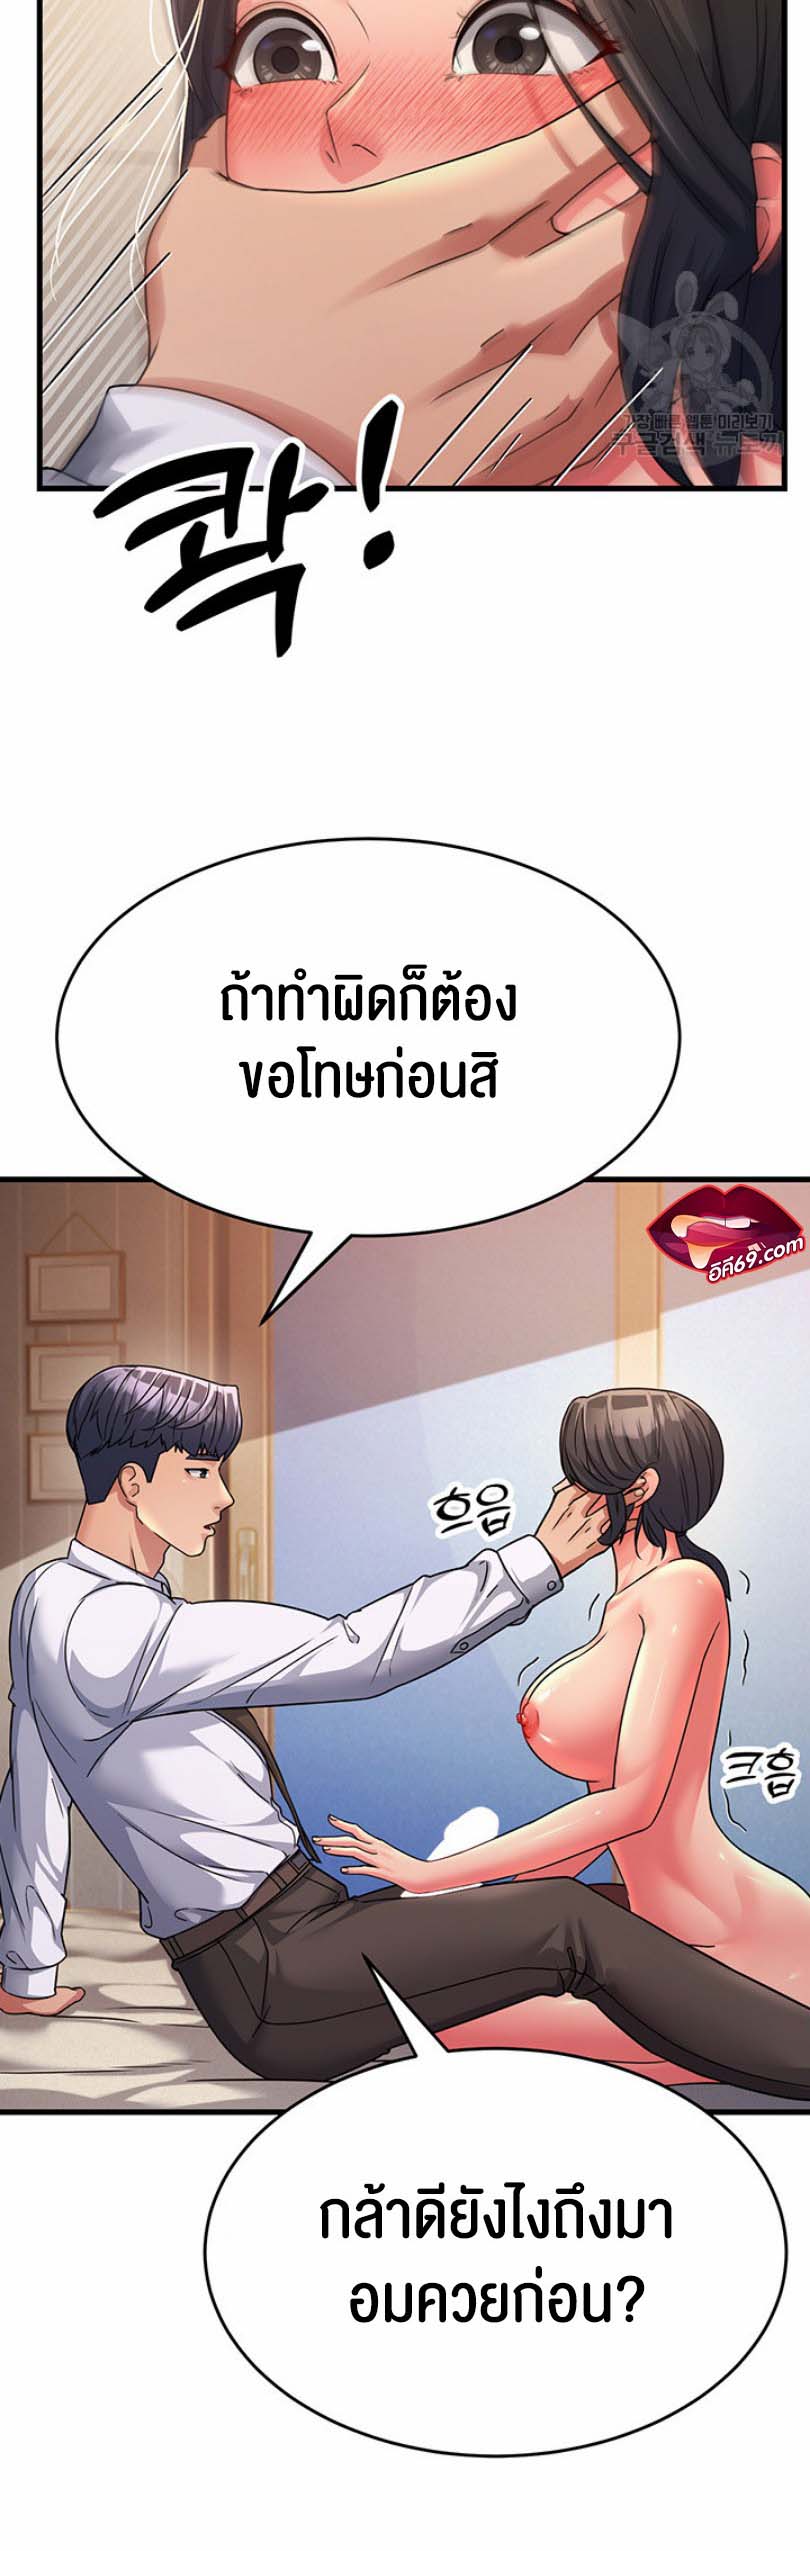 à¸­à¹ˆà¸²à¸™à¹‚à¸”à¸ˆà¸´à¸™ à¹€à¸£à¸·à¹ˆà¸­à¸‡ Mother in Law Bends To My Will 10 26